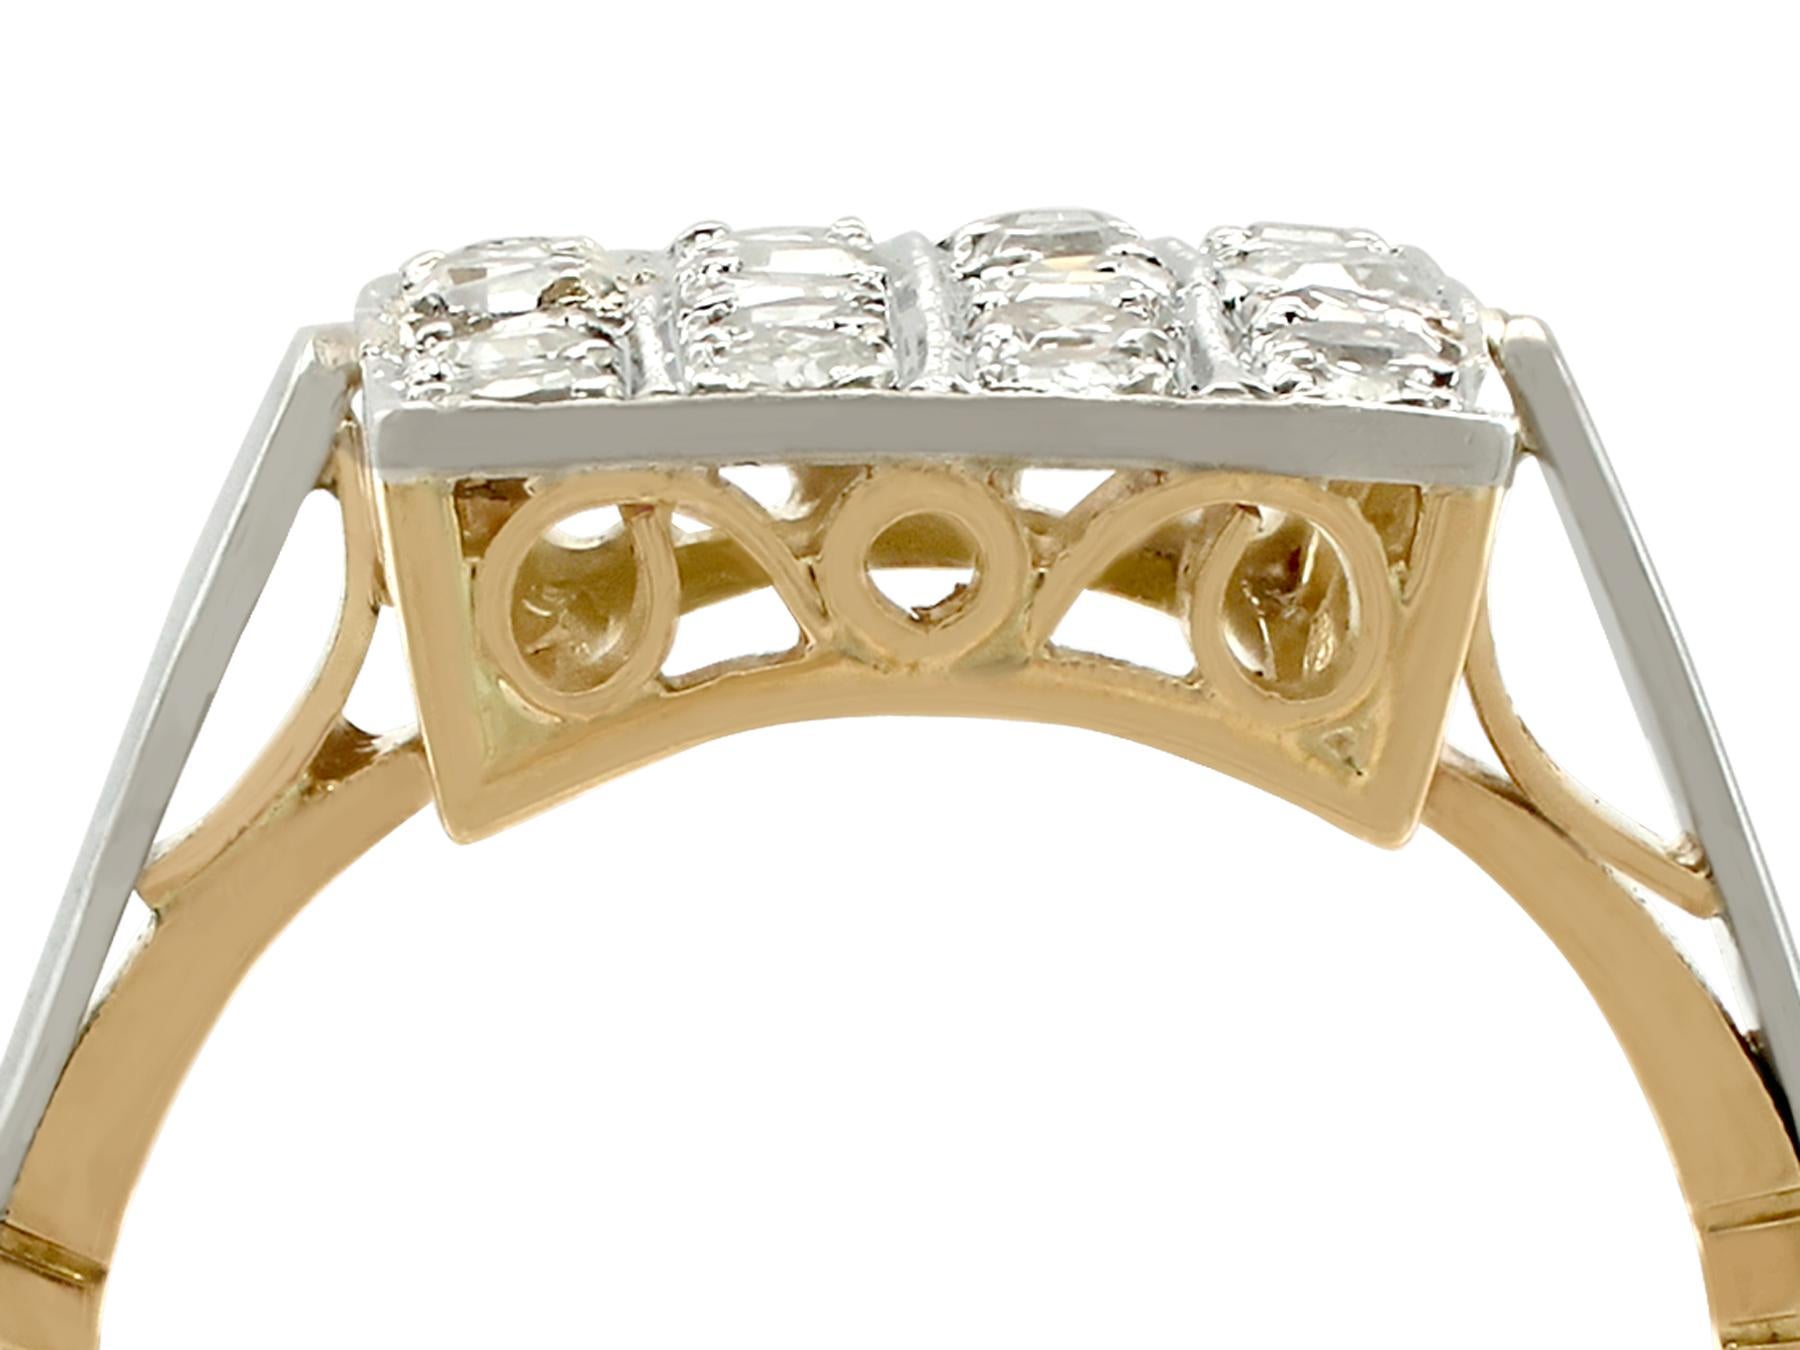 A fine and impressive 1.42 carat diamond and 18 karat yellow gold, 18 karat white gold set dress ring; part of our diverse vintage jewelry collections.

This fine and impressive rectangular shaped diamond dress ring has been crafted in 18k yellow